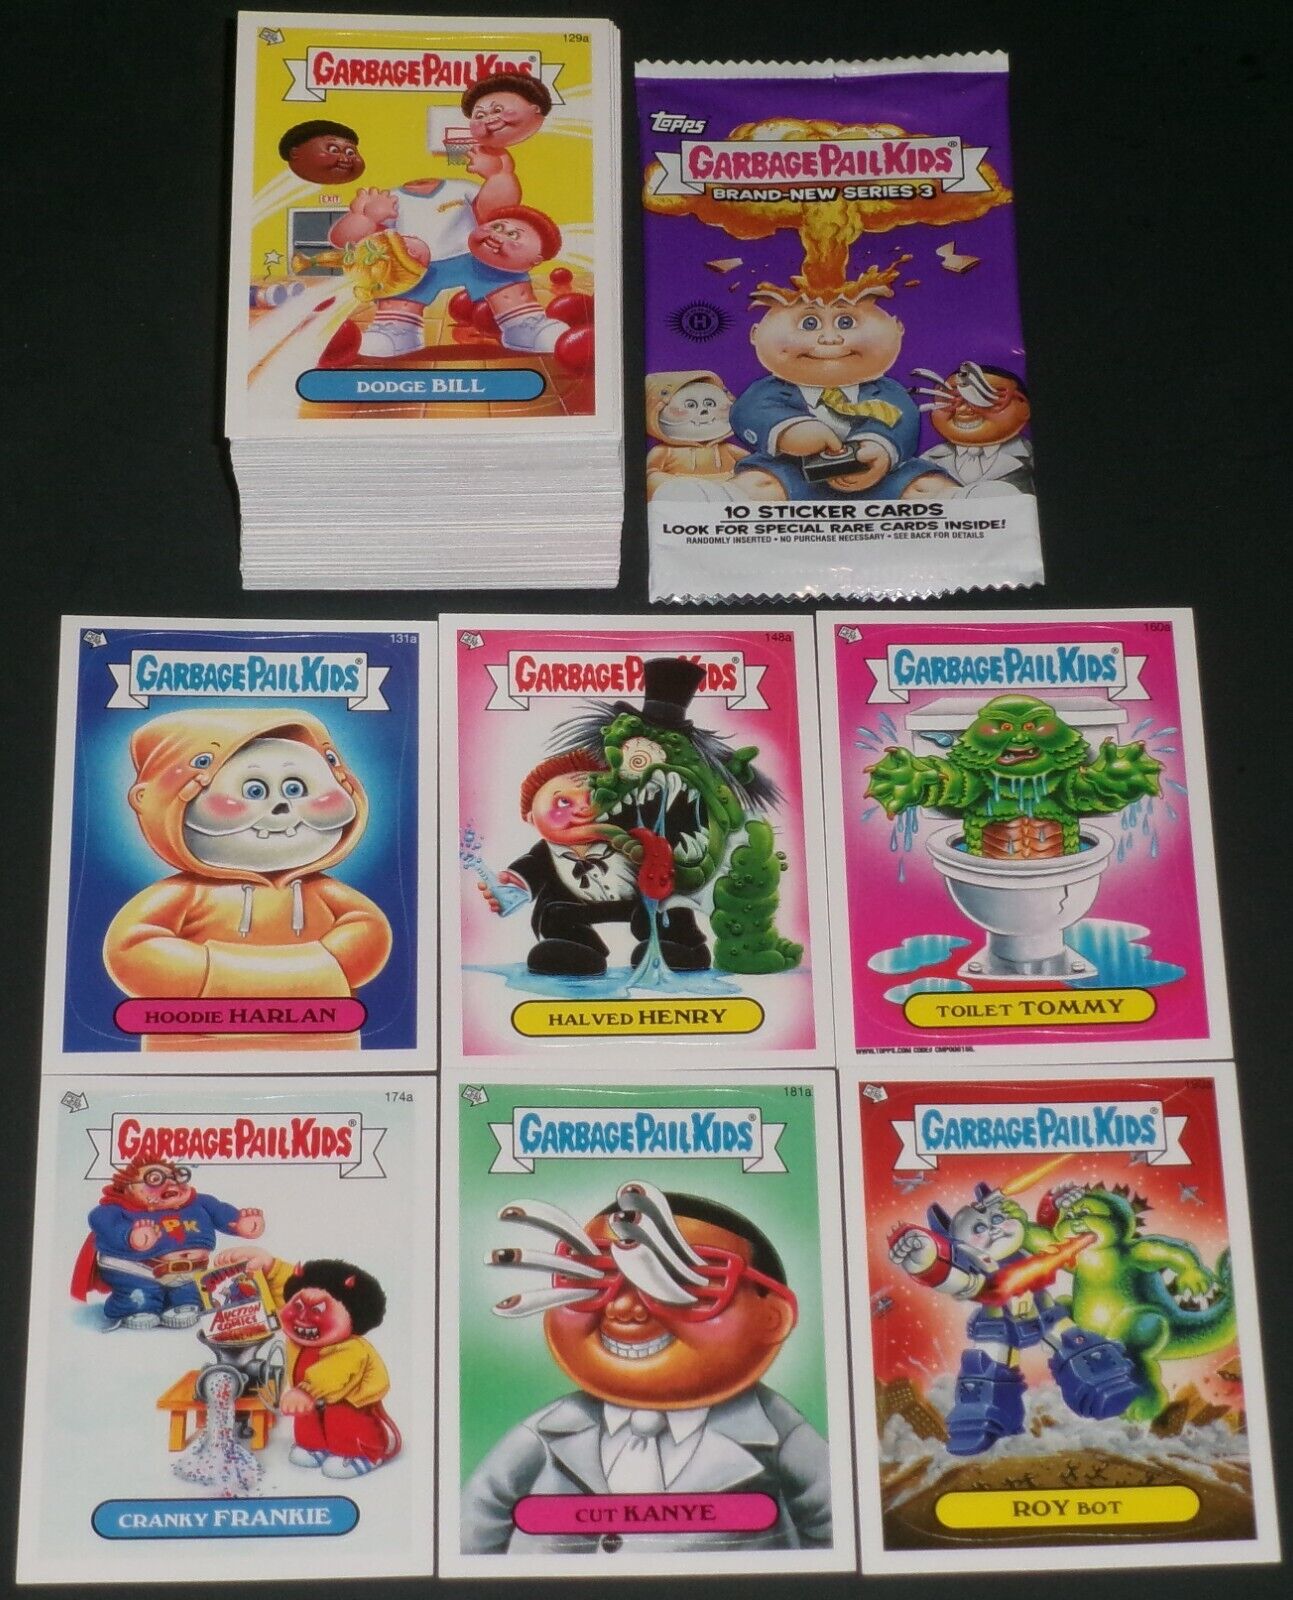 2013 Garbage Pail Kids * Brand New Series 3 * Complete Base Set 132 Cards - BNS3